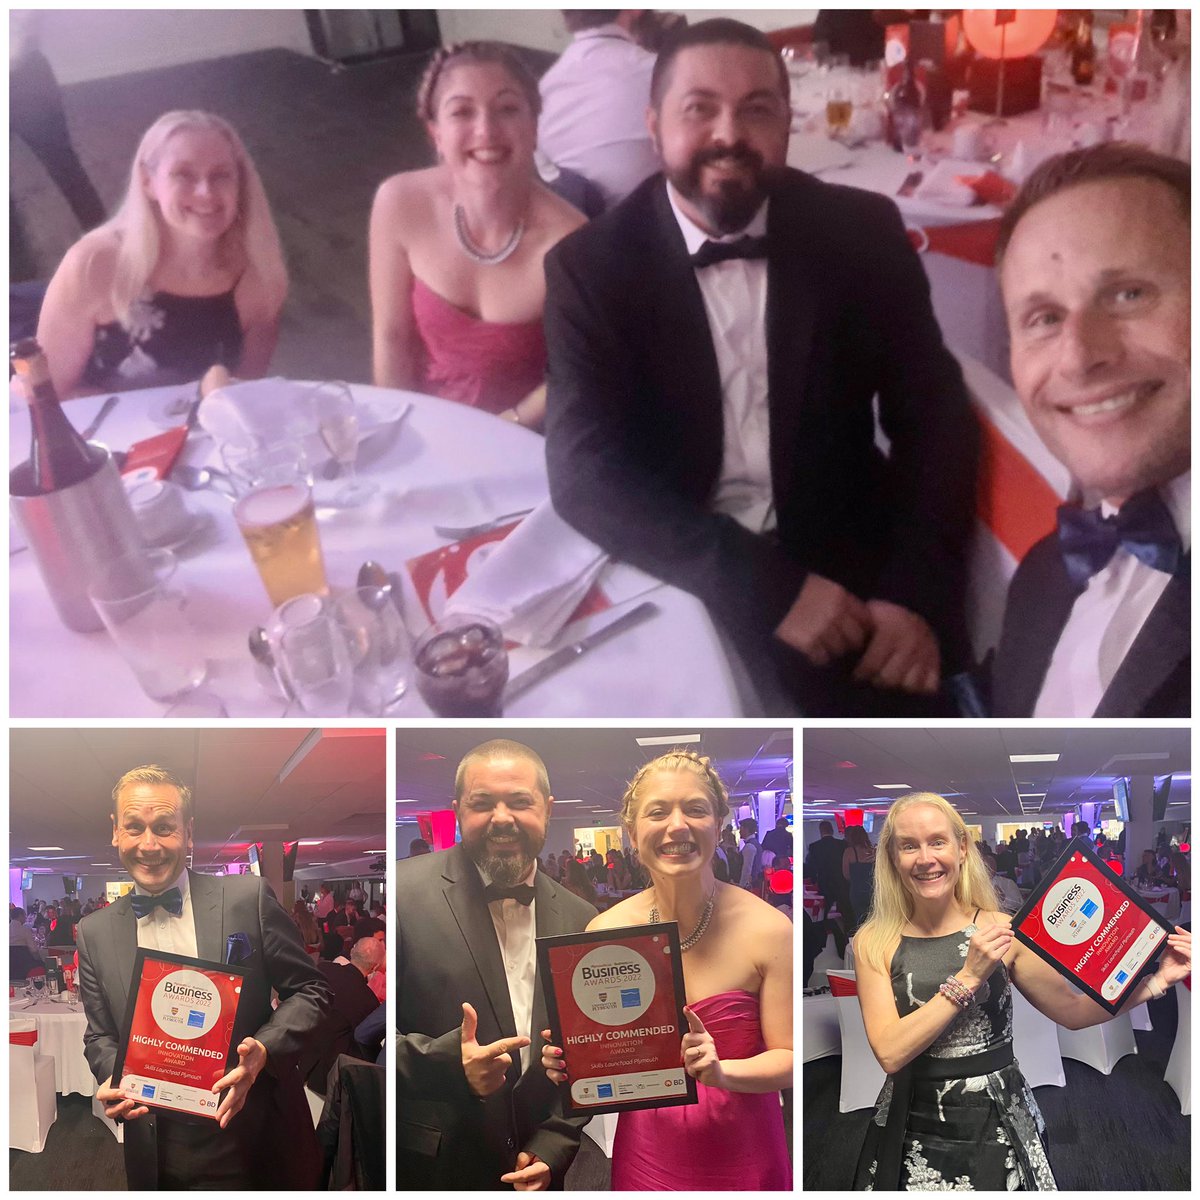 What a fantastic event the #PlymouthLiveBusinessAwards was! 

We are proud to have been highly commended by the panel for our innovation in setting up our city-wide partnership that supports the Plymouth people to access skills, training, education, careers and jobs.